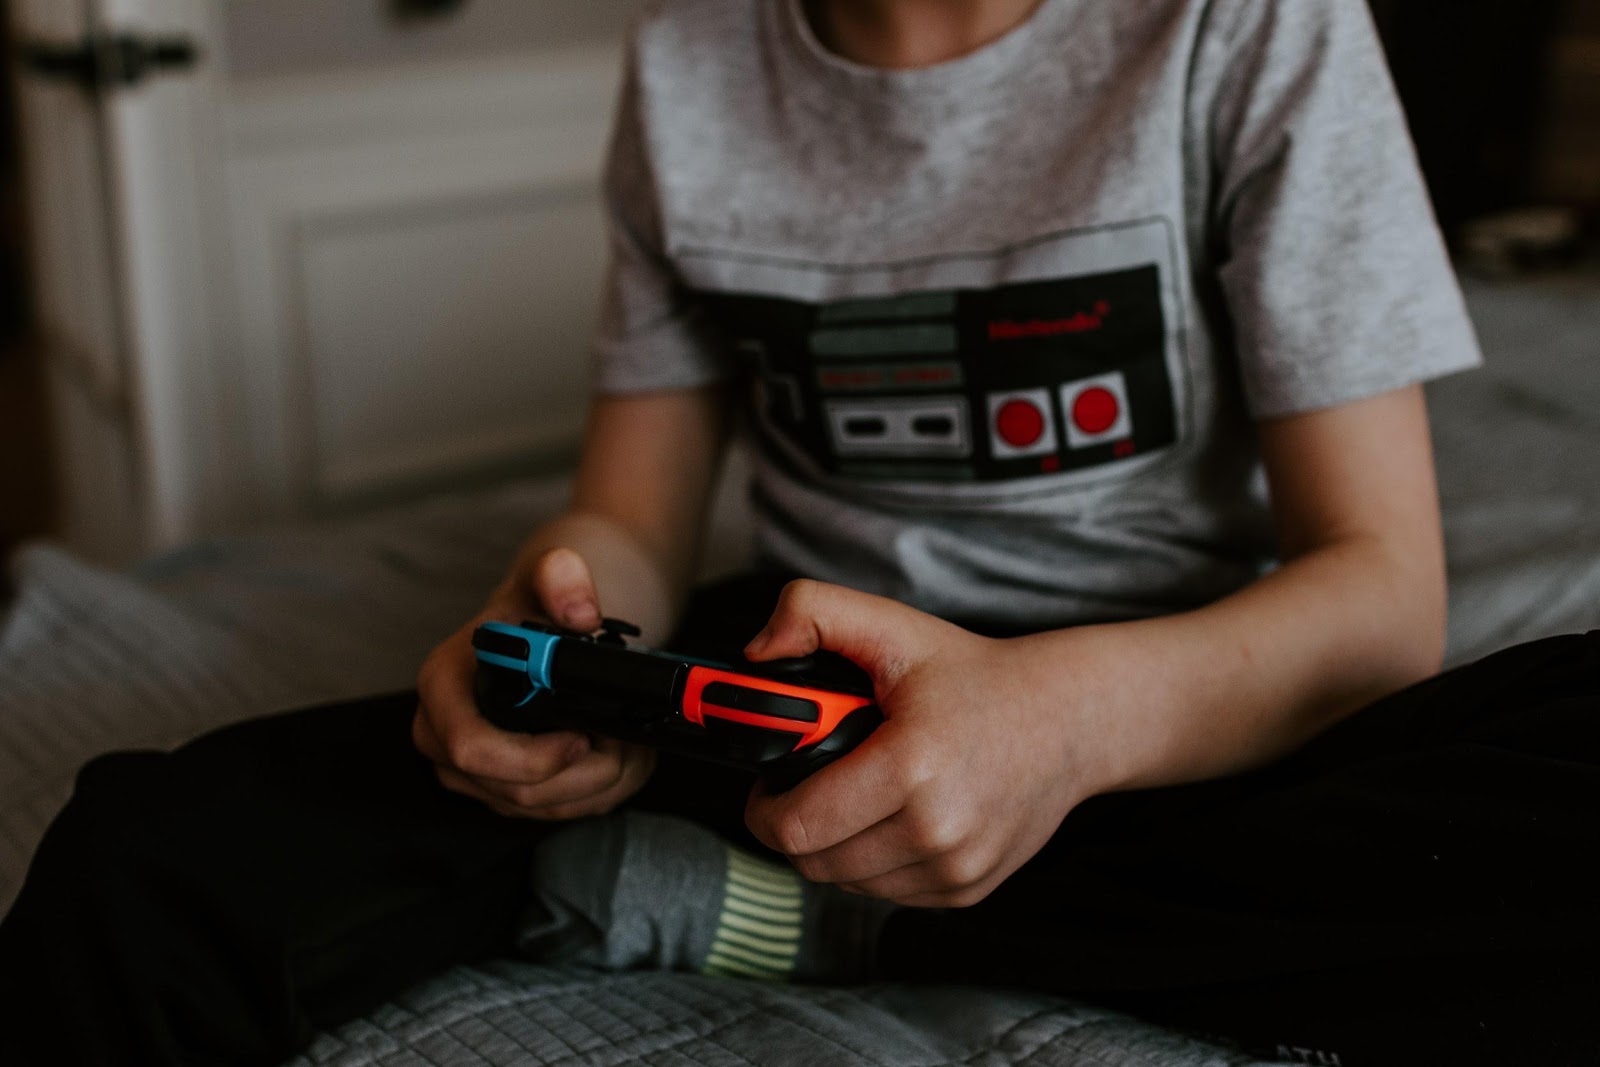 Managing your child's screen time does not mean totally cutting off gaming.